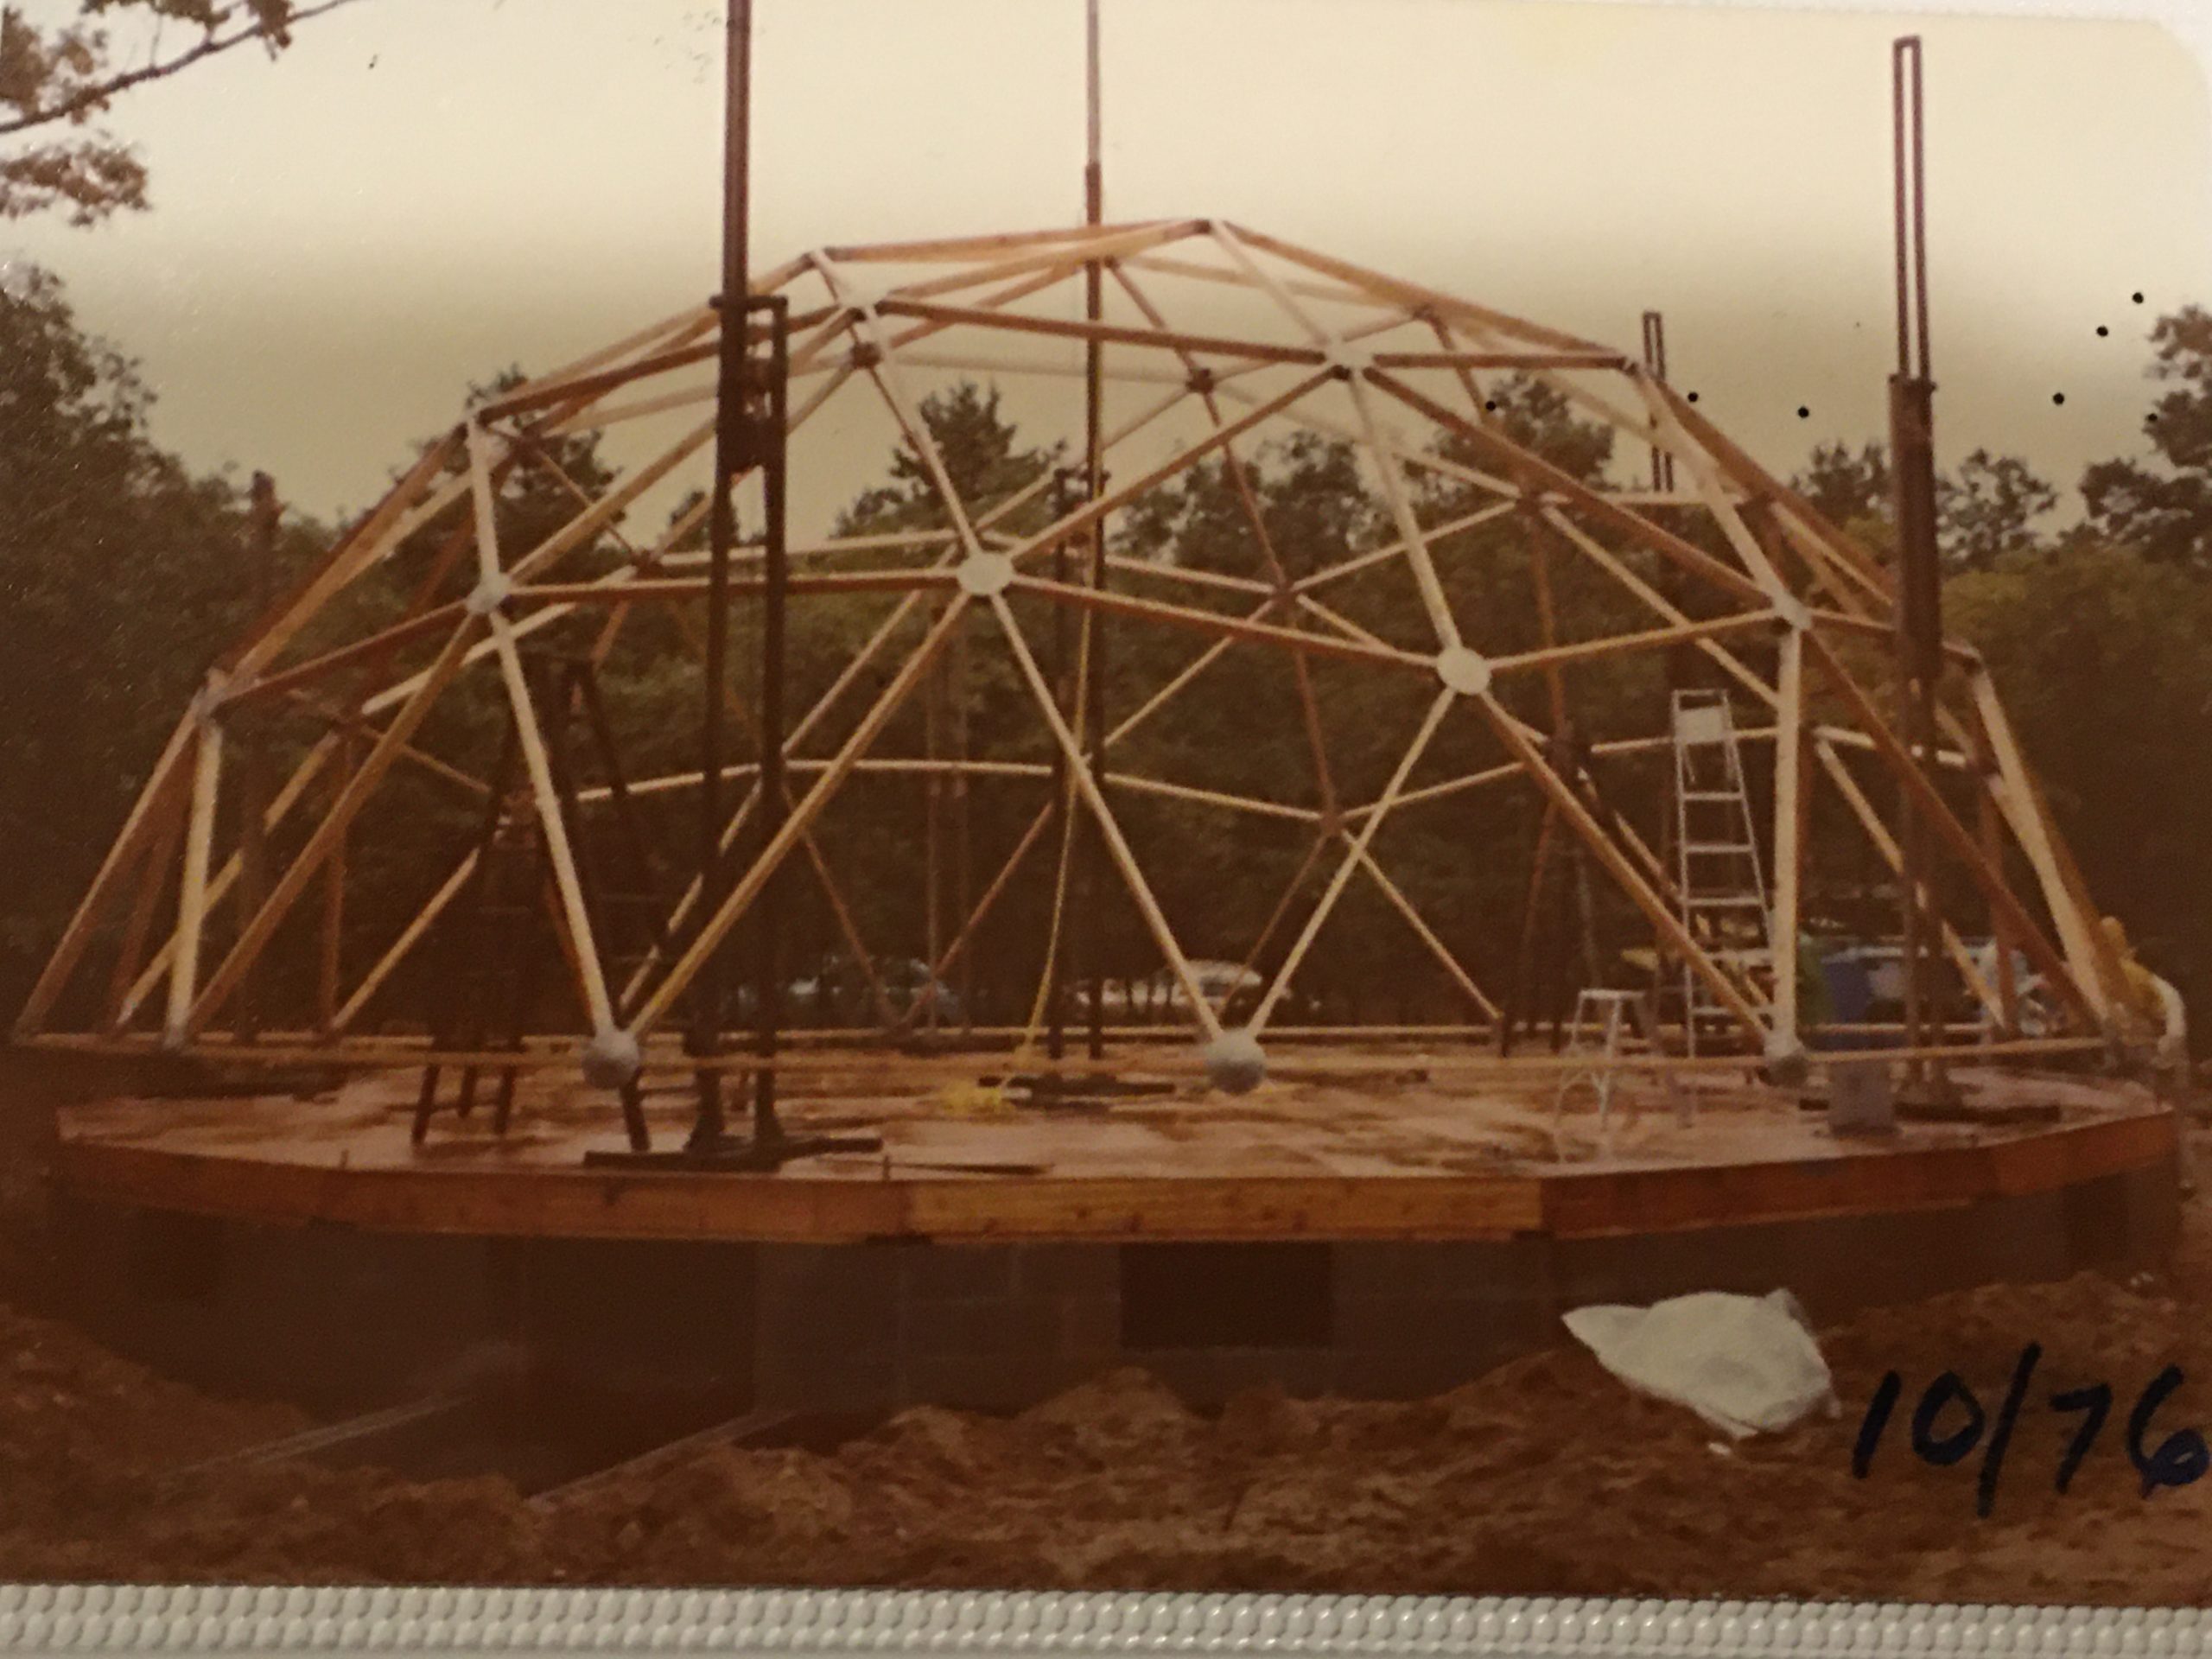 In 1976, the top of the dome was set on pump jacks to be raised.